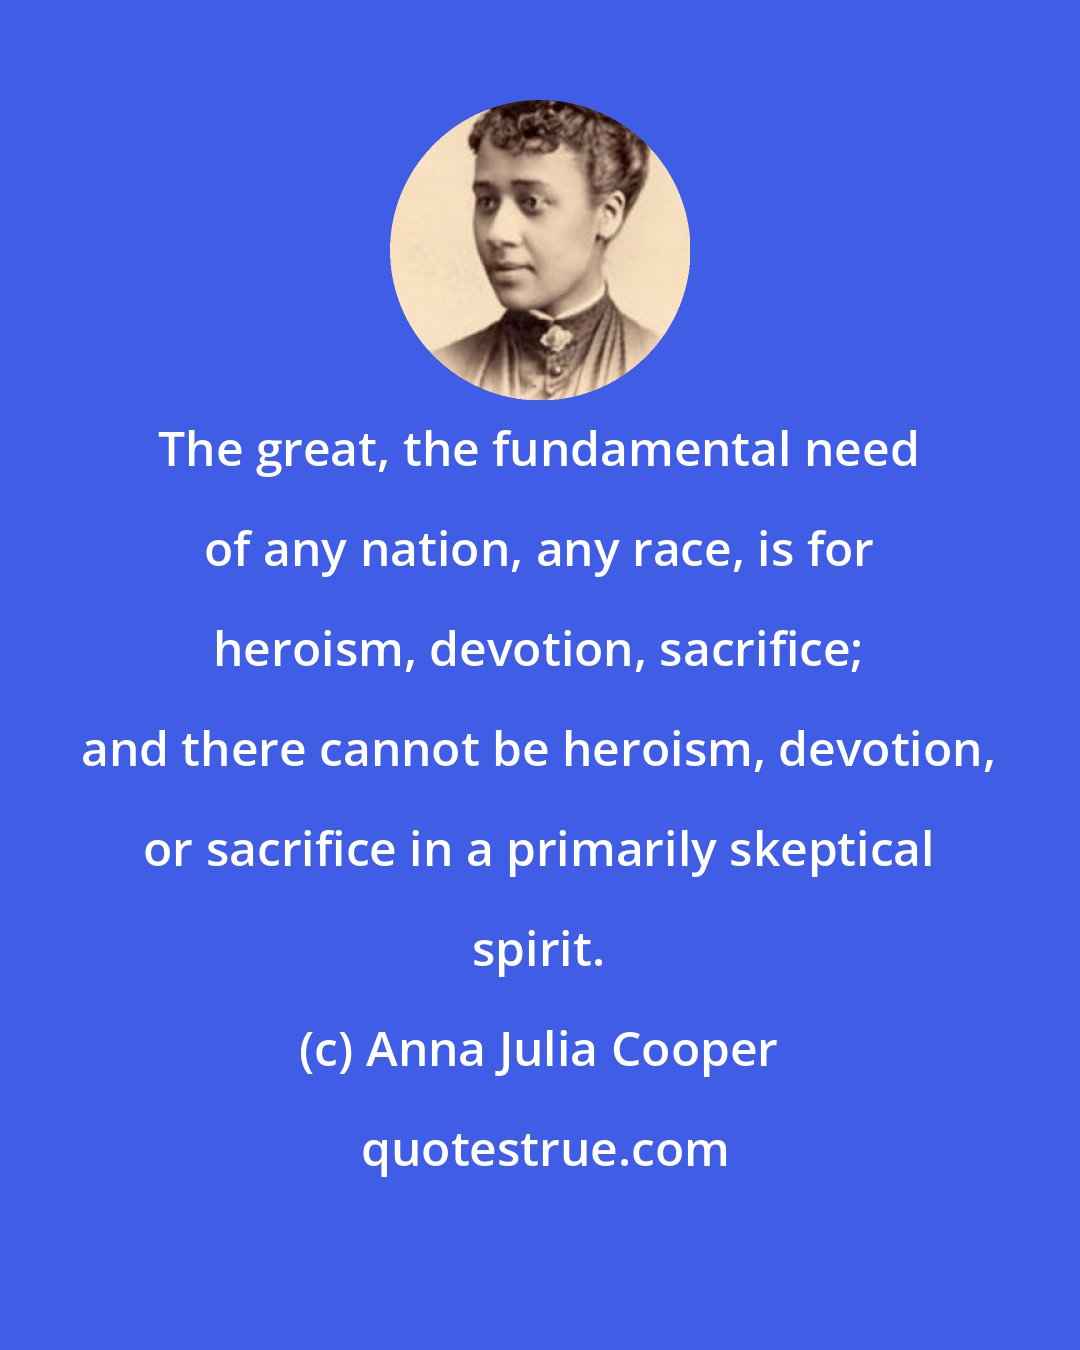 Anna Julia Cooper: The great, the fundamental need of any nation, any race, is for heroism, devotion, sacrifice; and there cannot be heroism, devotion, or sacrifice in a primarily skeptical spirit.